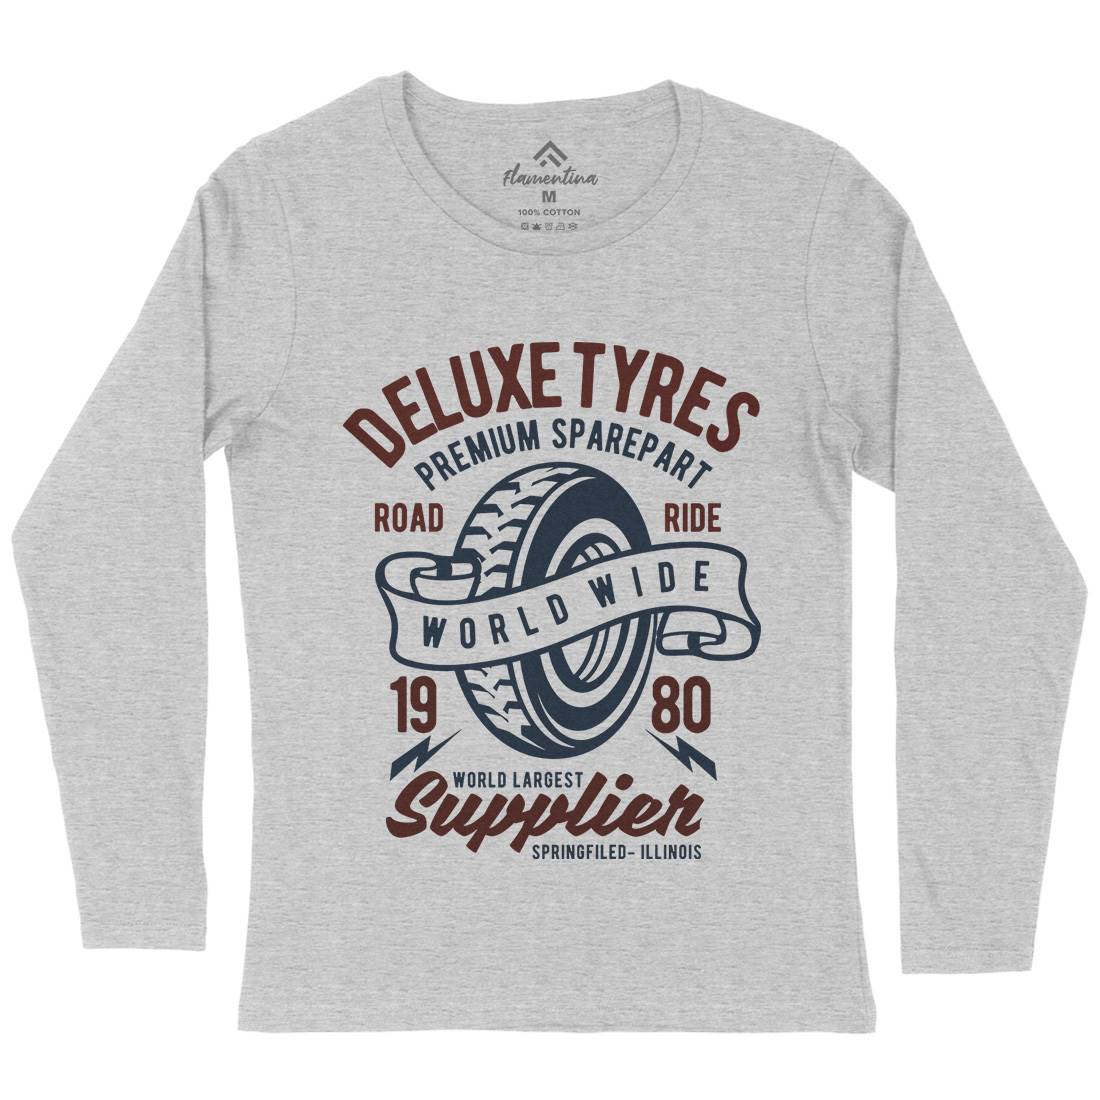 Deluxe Tyres Womens Long Sleeve T-Shirt Cars B204